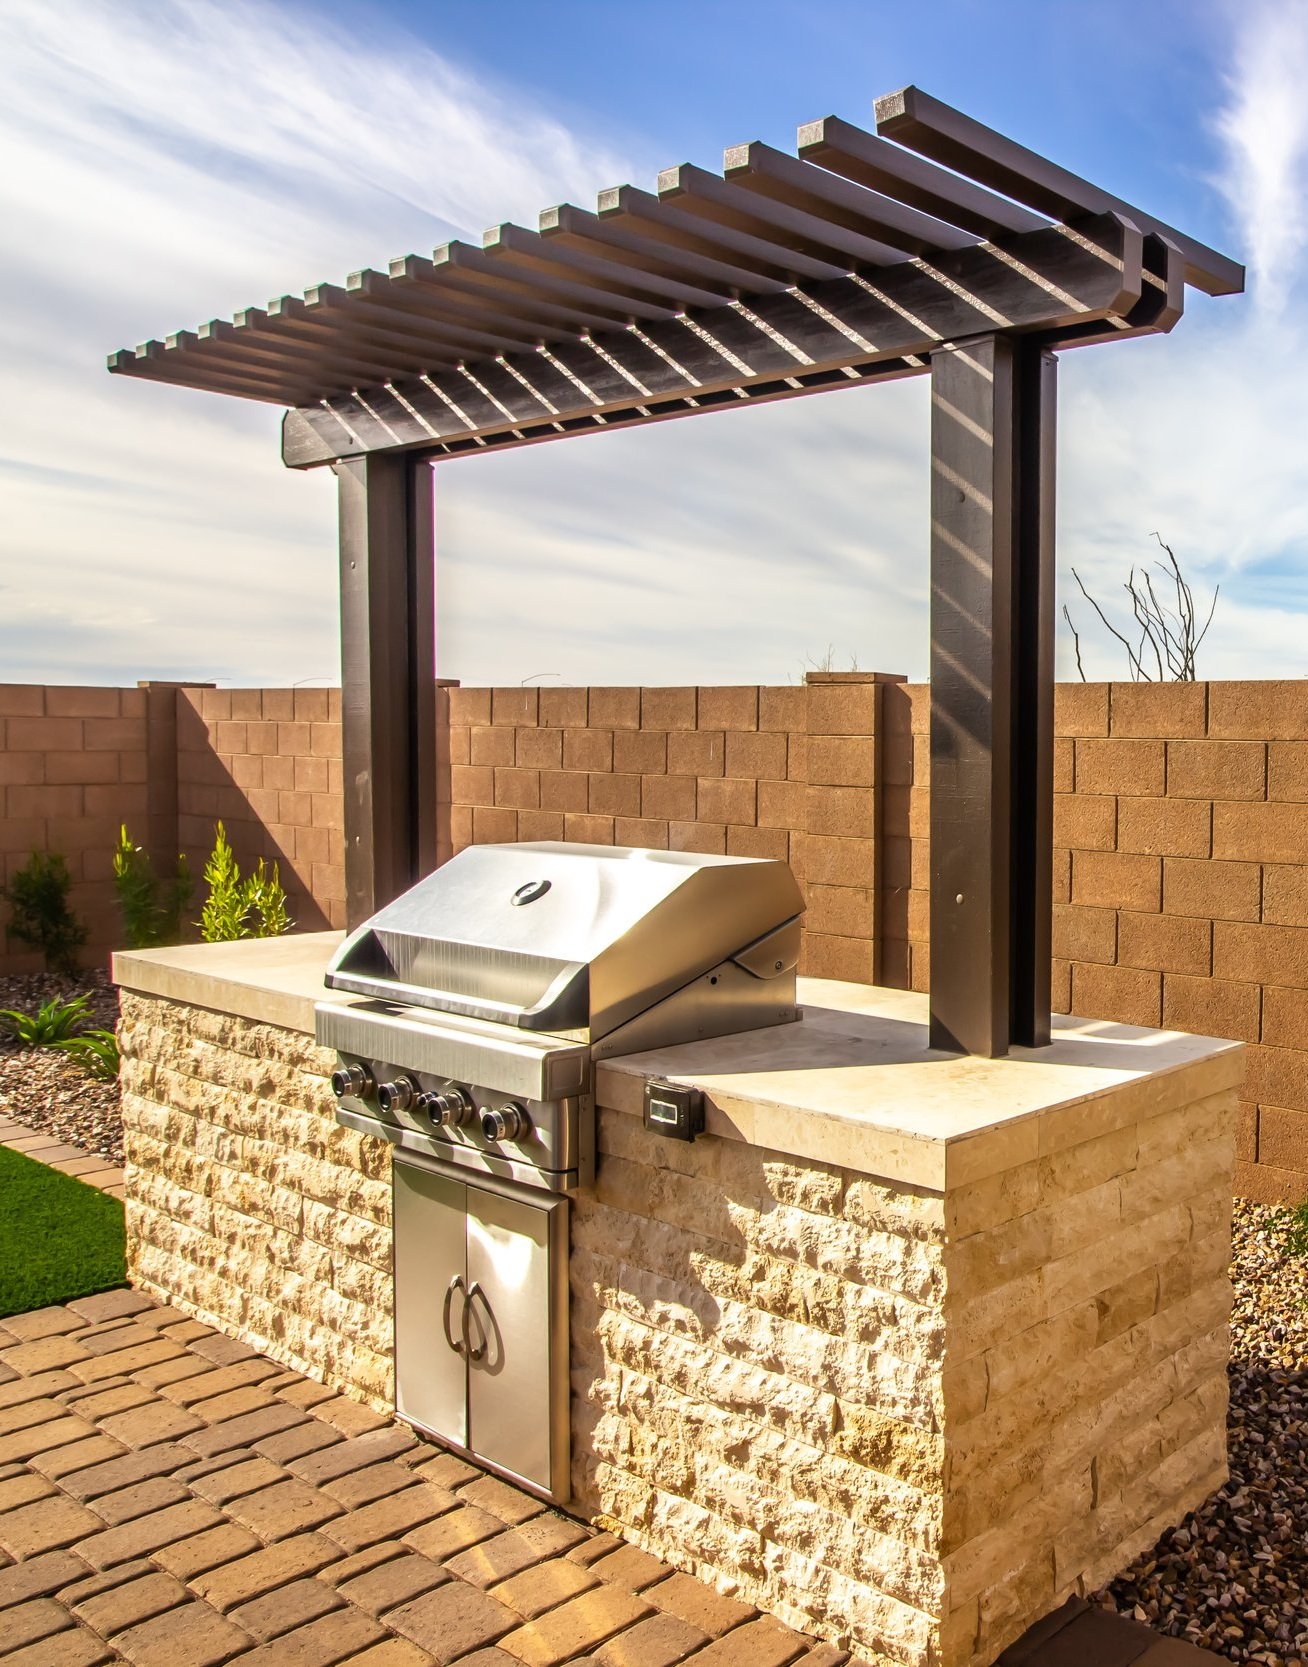 What's the Best Material for Outdoor Kitchen Countertops